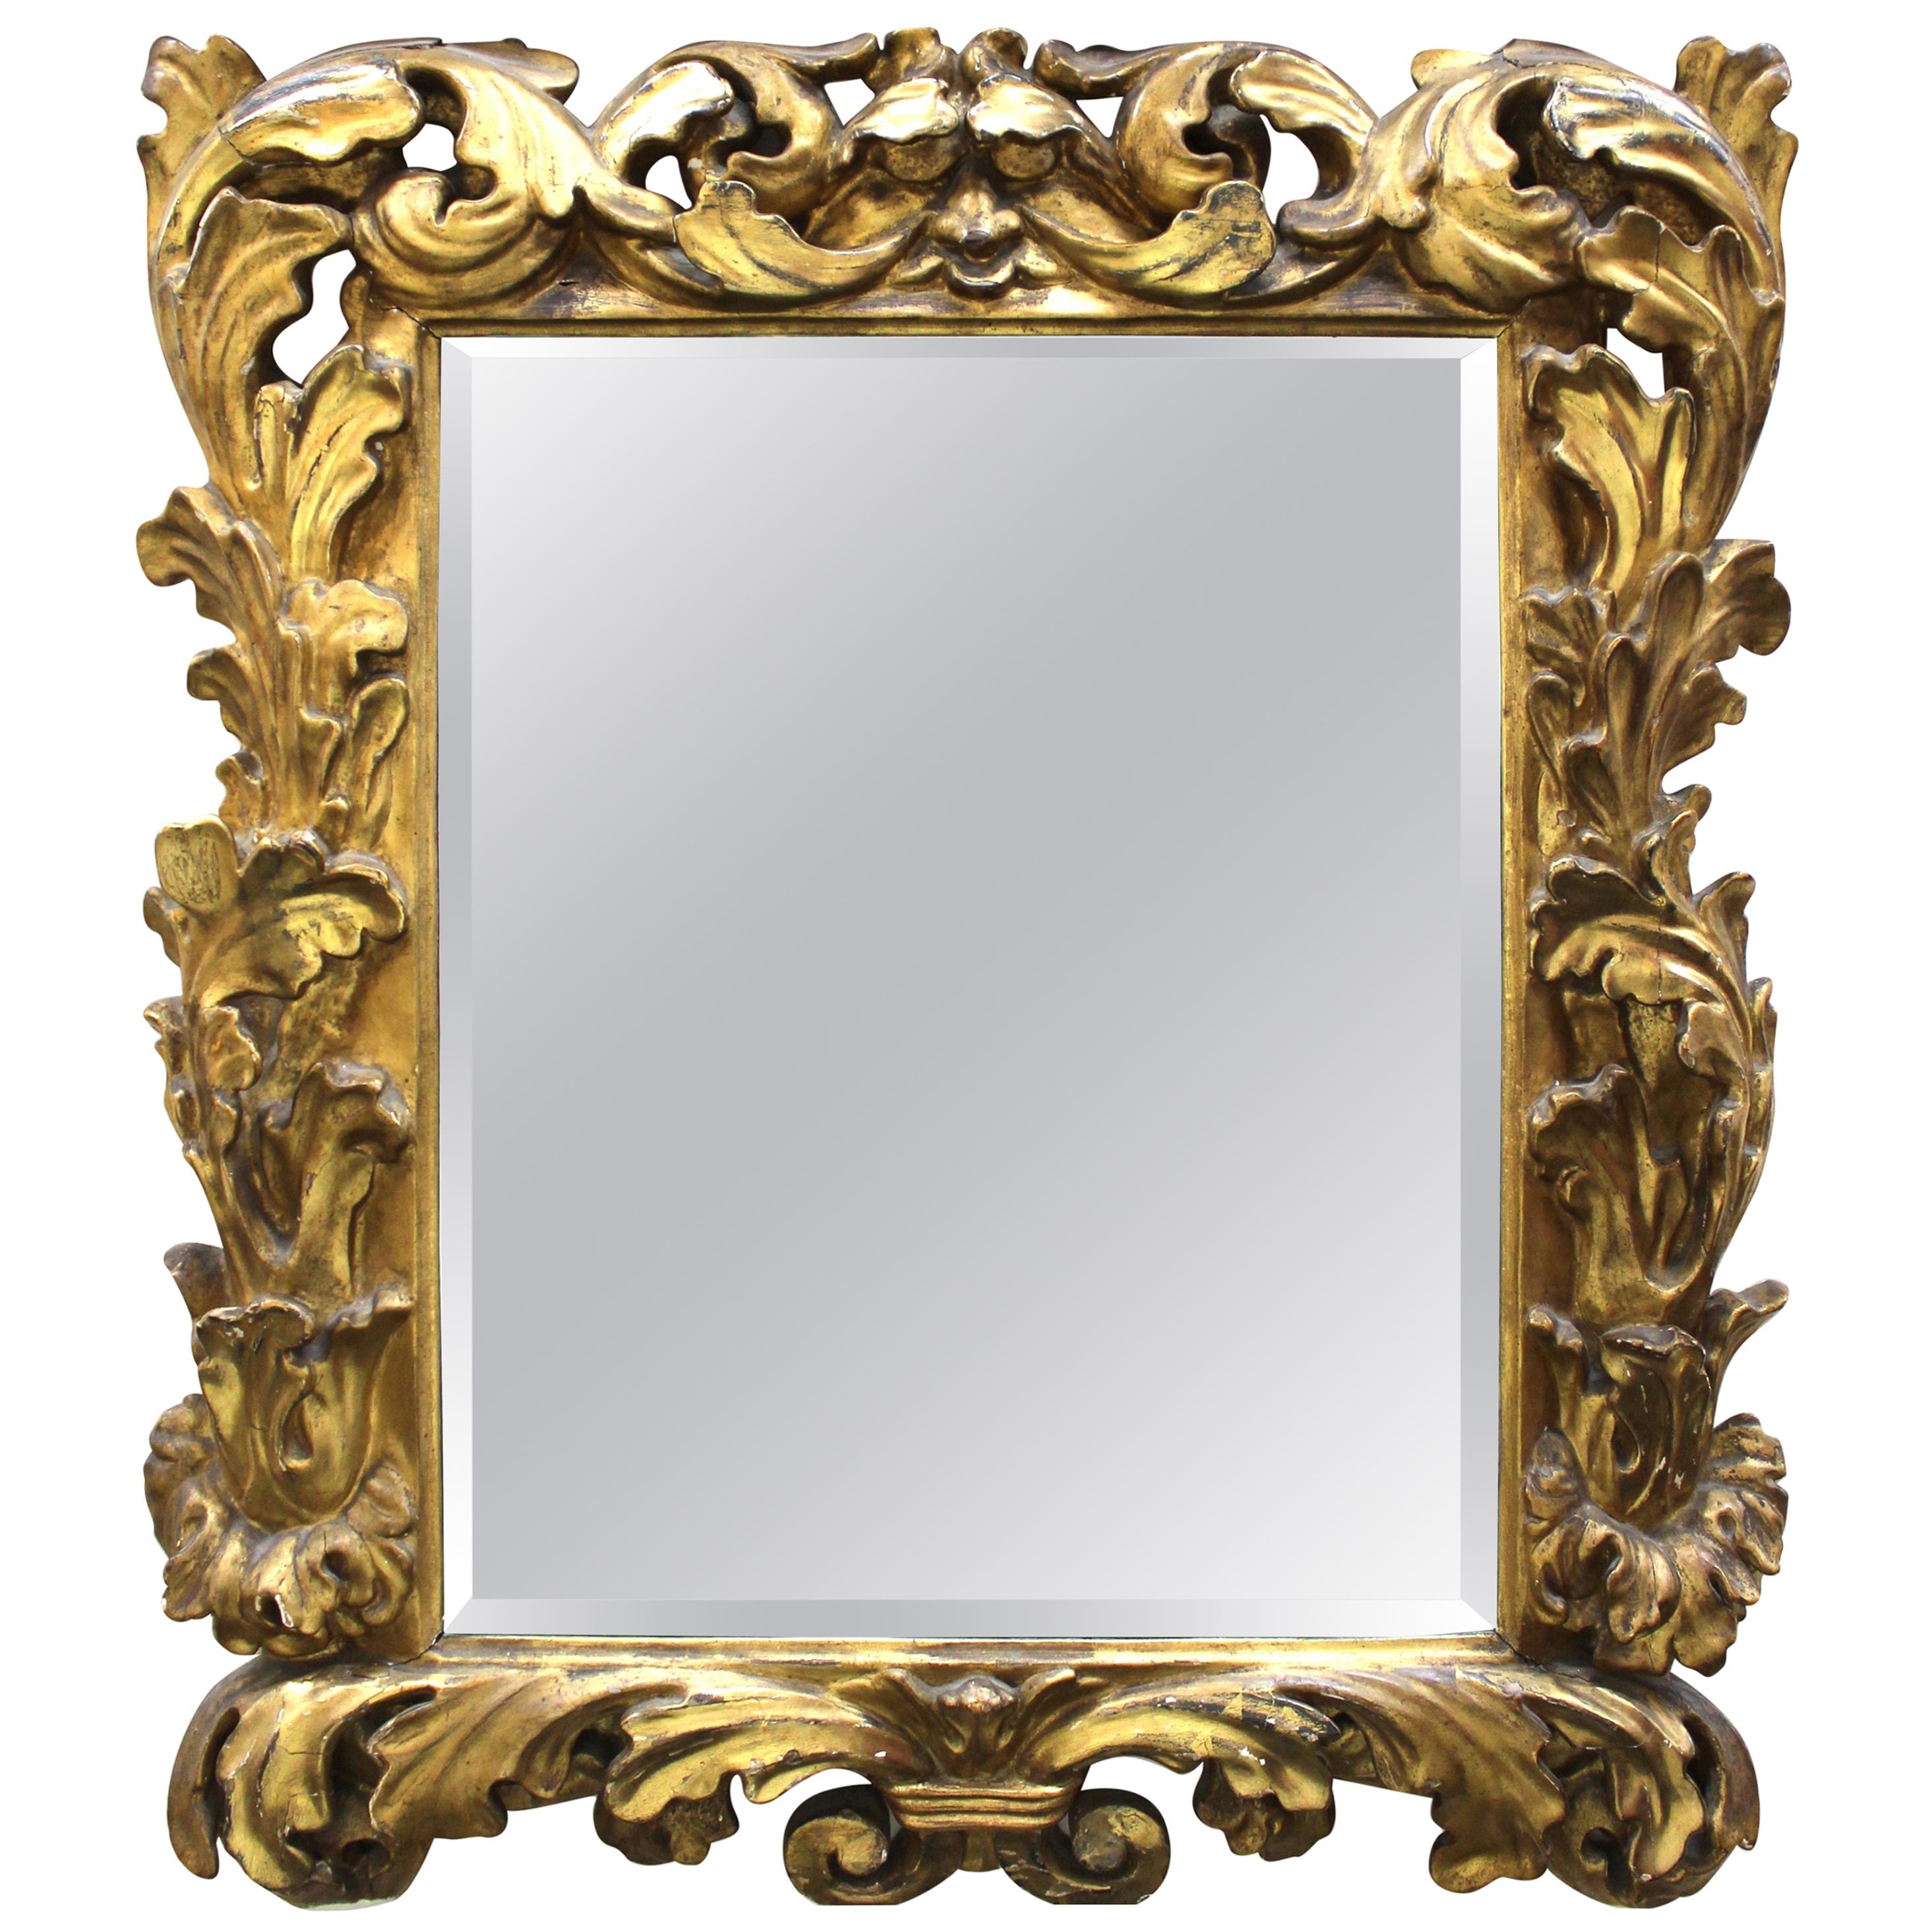 Italian Baroque Sculpted Giltwood Mirror with Acanthus Leaves Decor